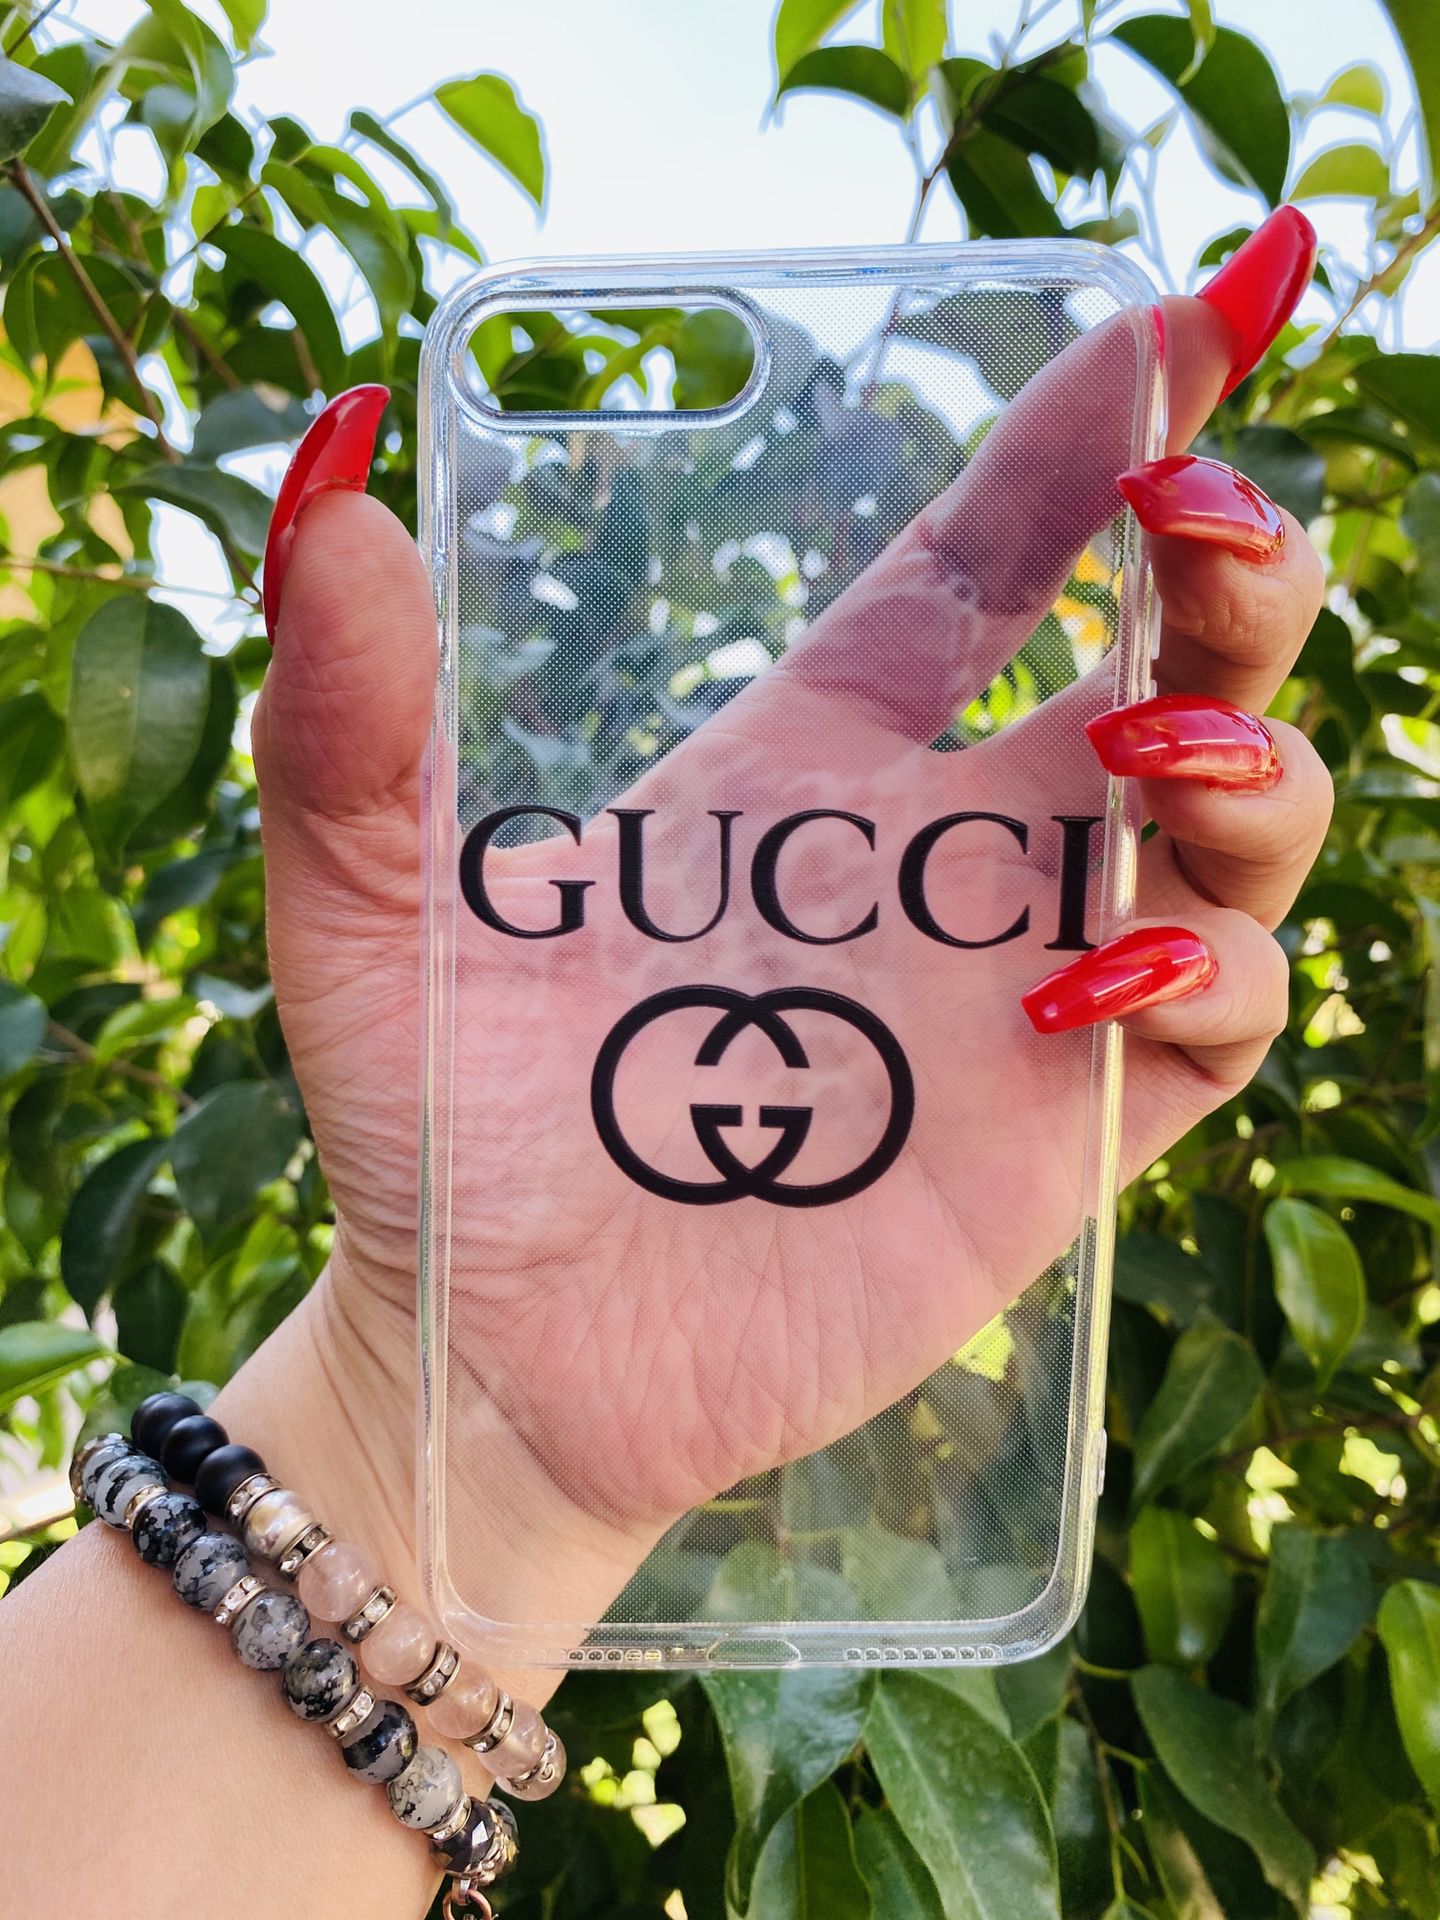 Brand new cool iphone 7+ or 8+ PLUS case cover rubber Clear transparent see through girls guys mens womens skate skateboard swag brands hype hypebeas